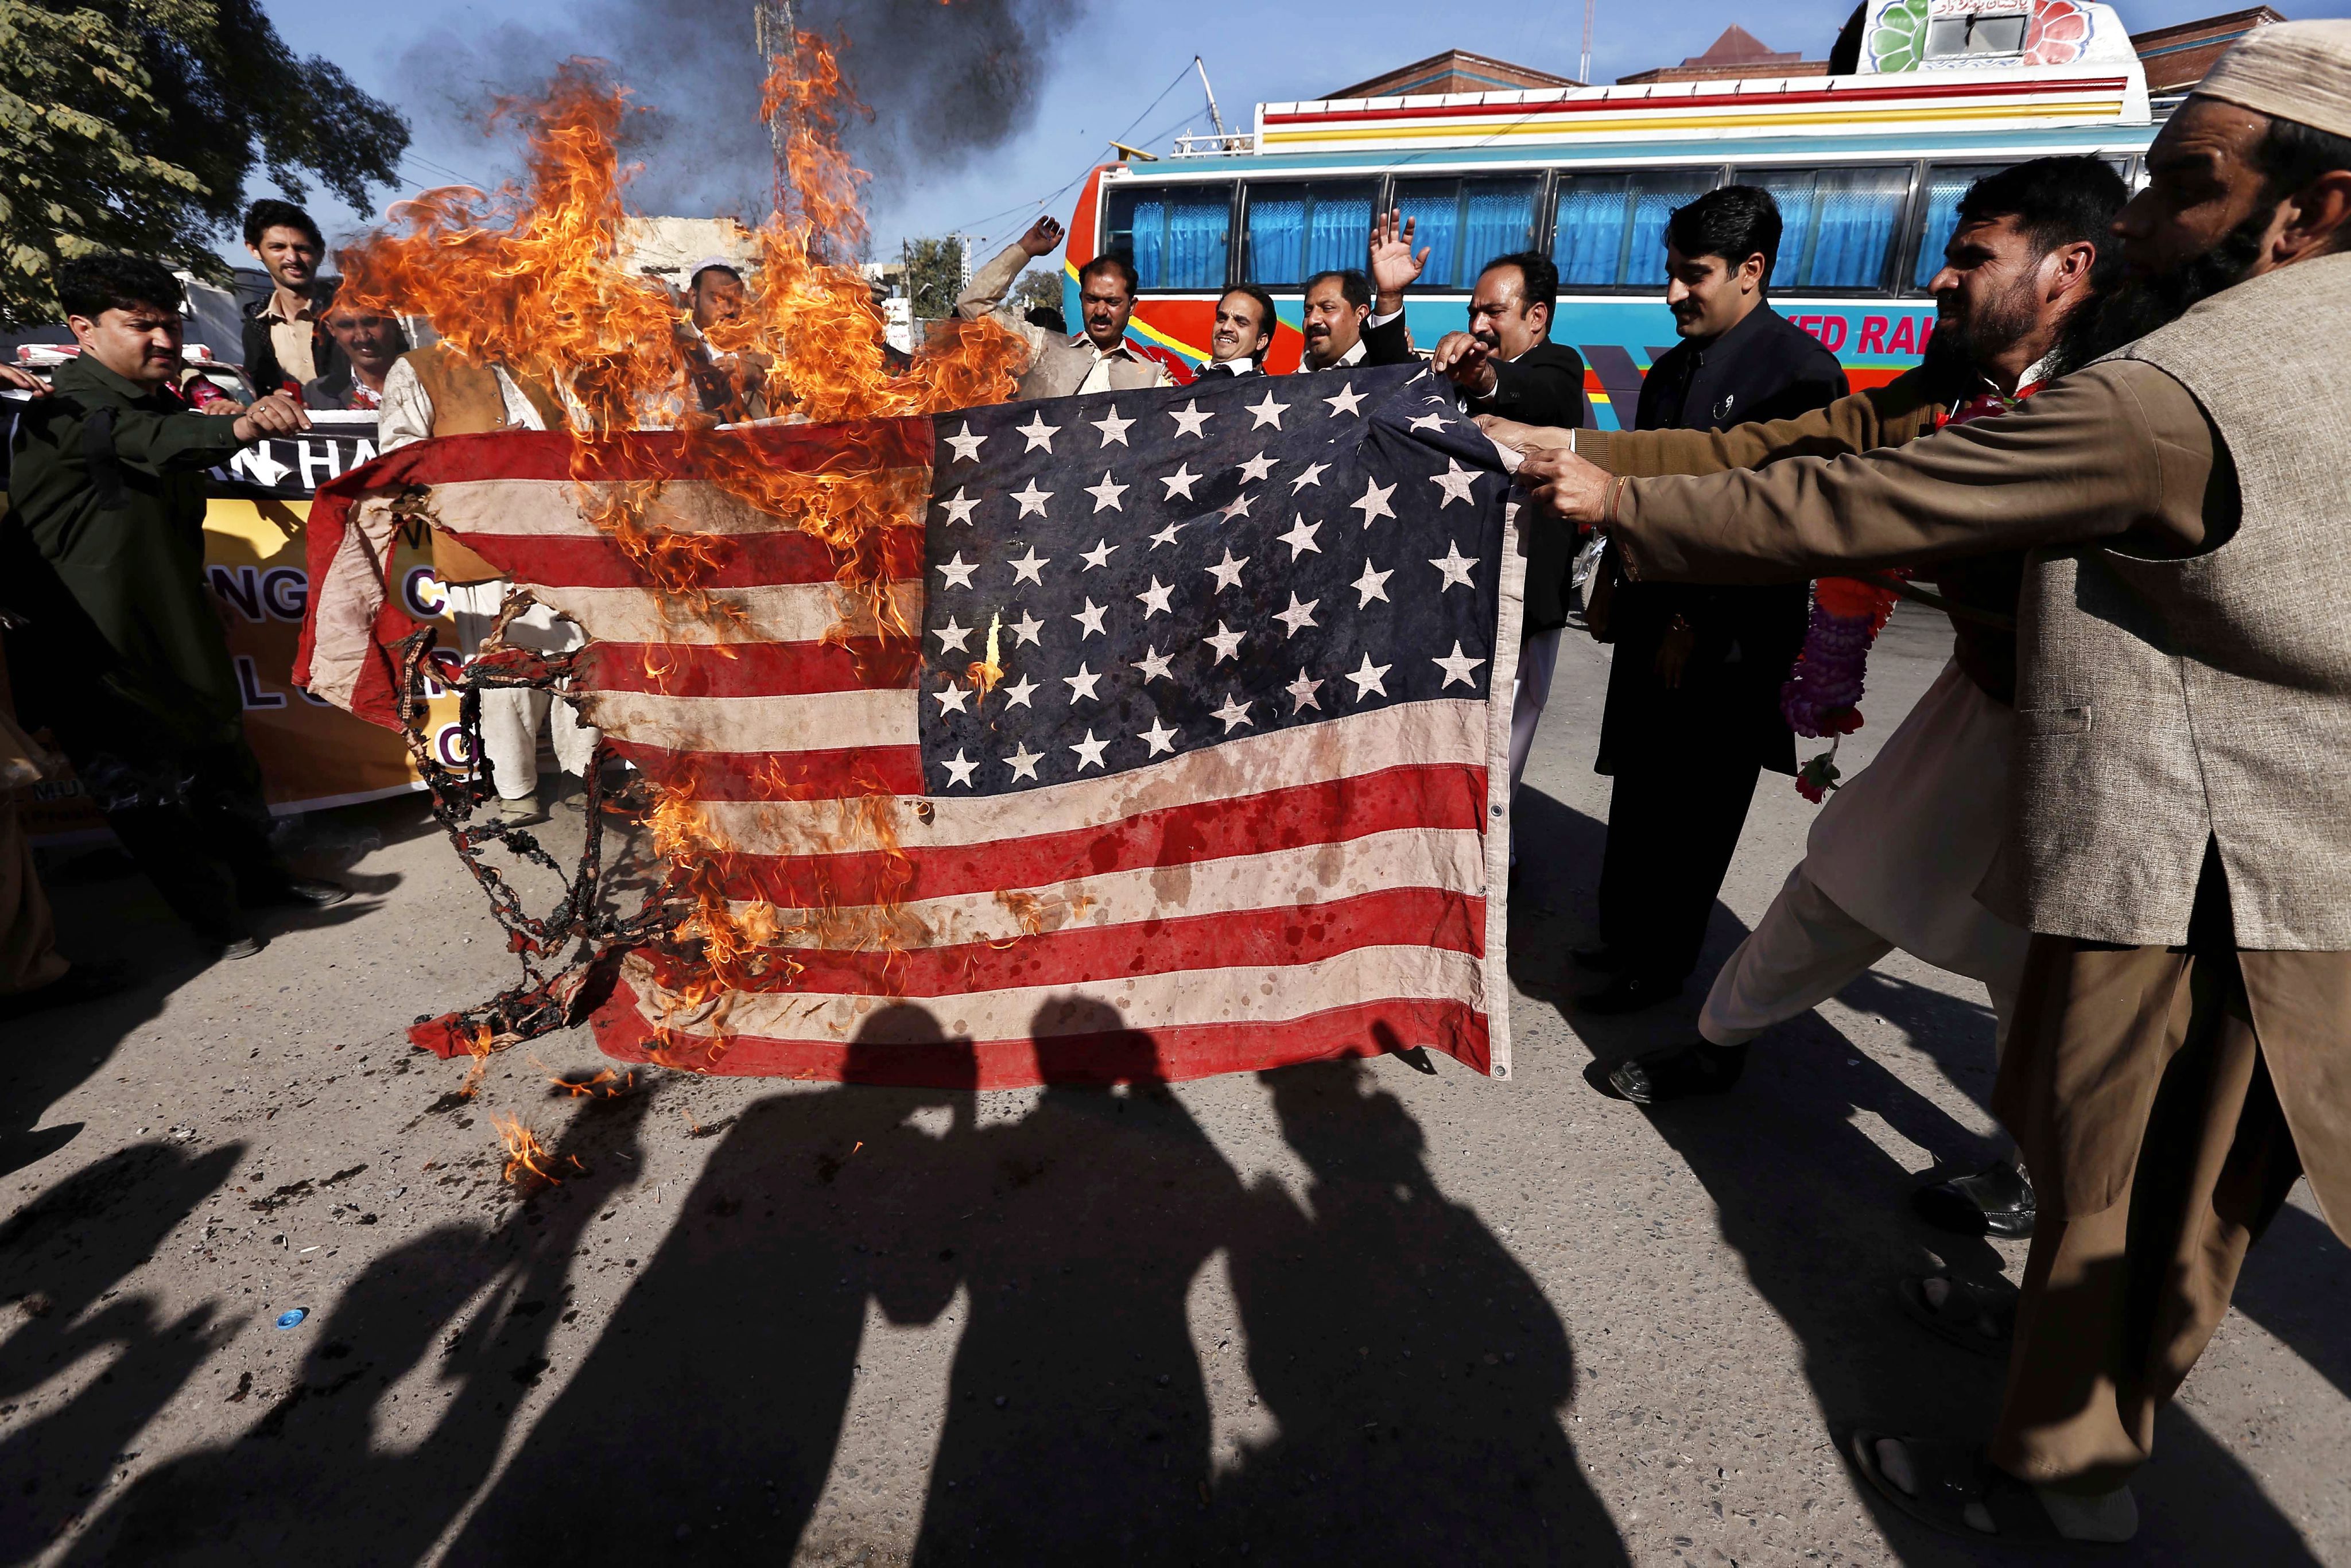 Pakistanis burn a US flag in Peshawar during a protest against US drone attacks. Photo: EPA